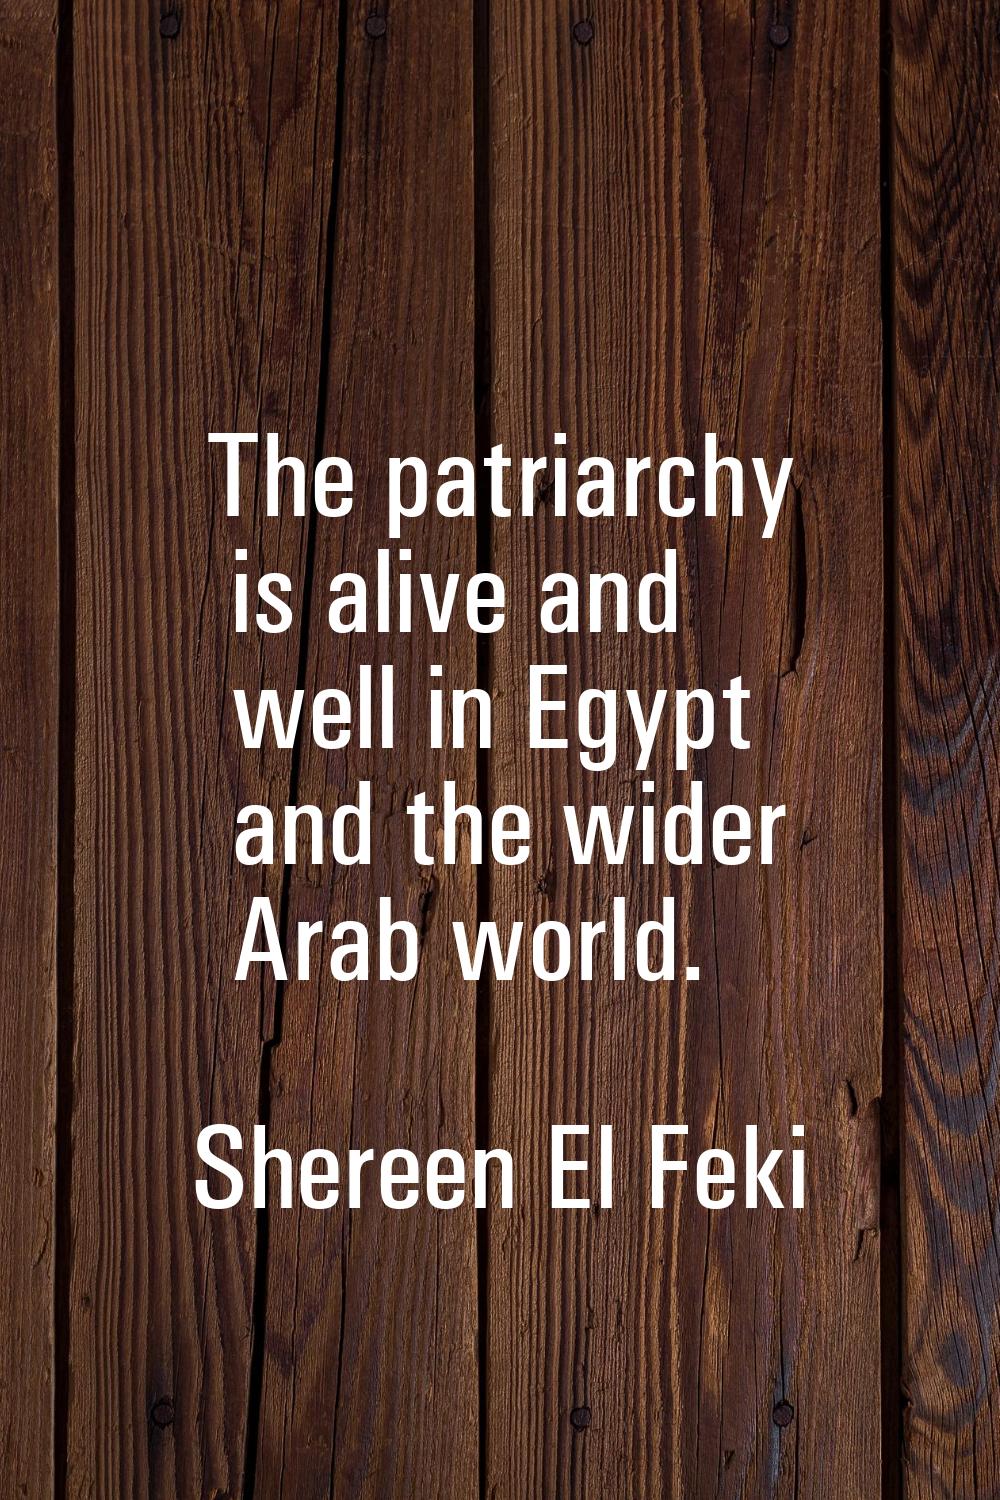 The patriarchy is alive and well in Egypt and the wider Arab world.